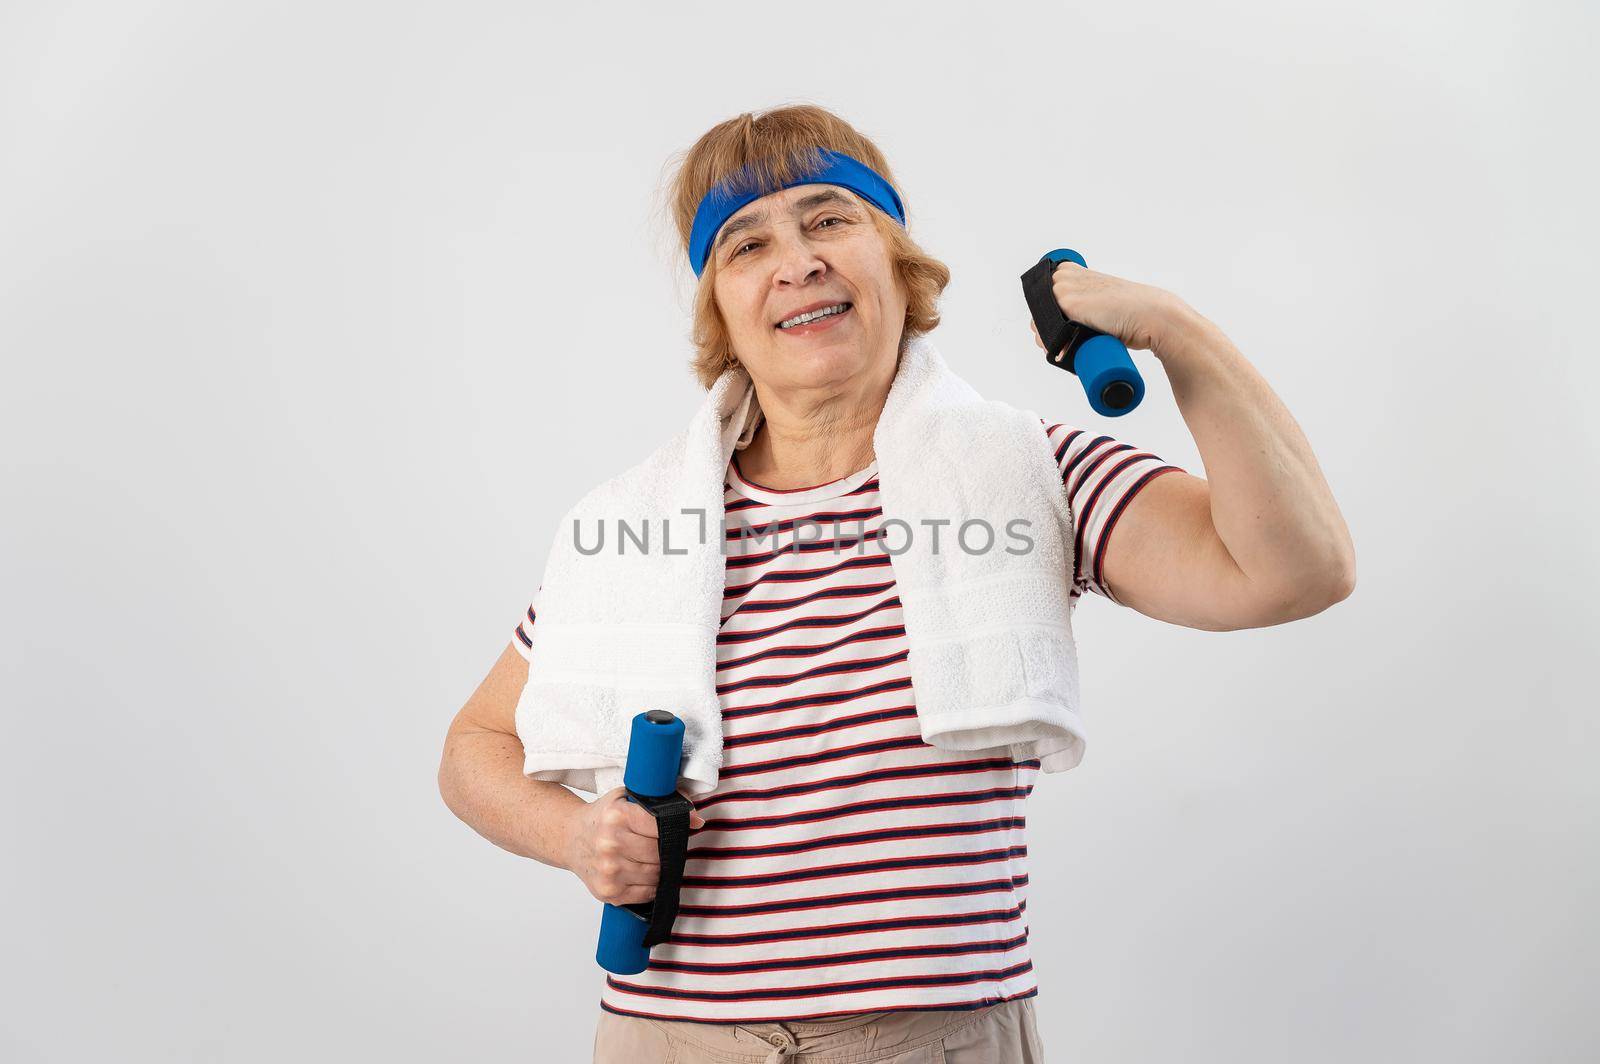 An elderly woman with a blue bandage on her head trains with dumbbells on a white background by mrwed54